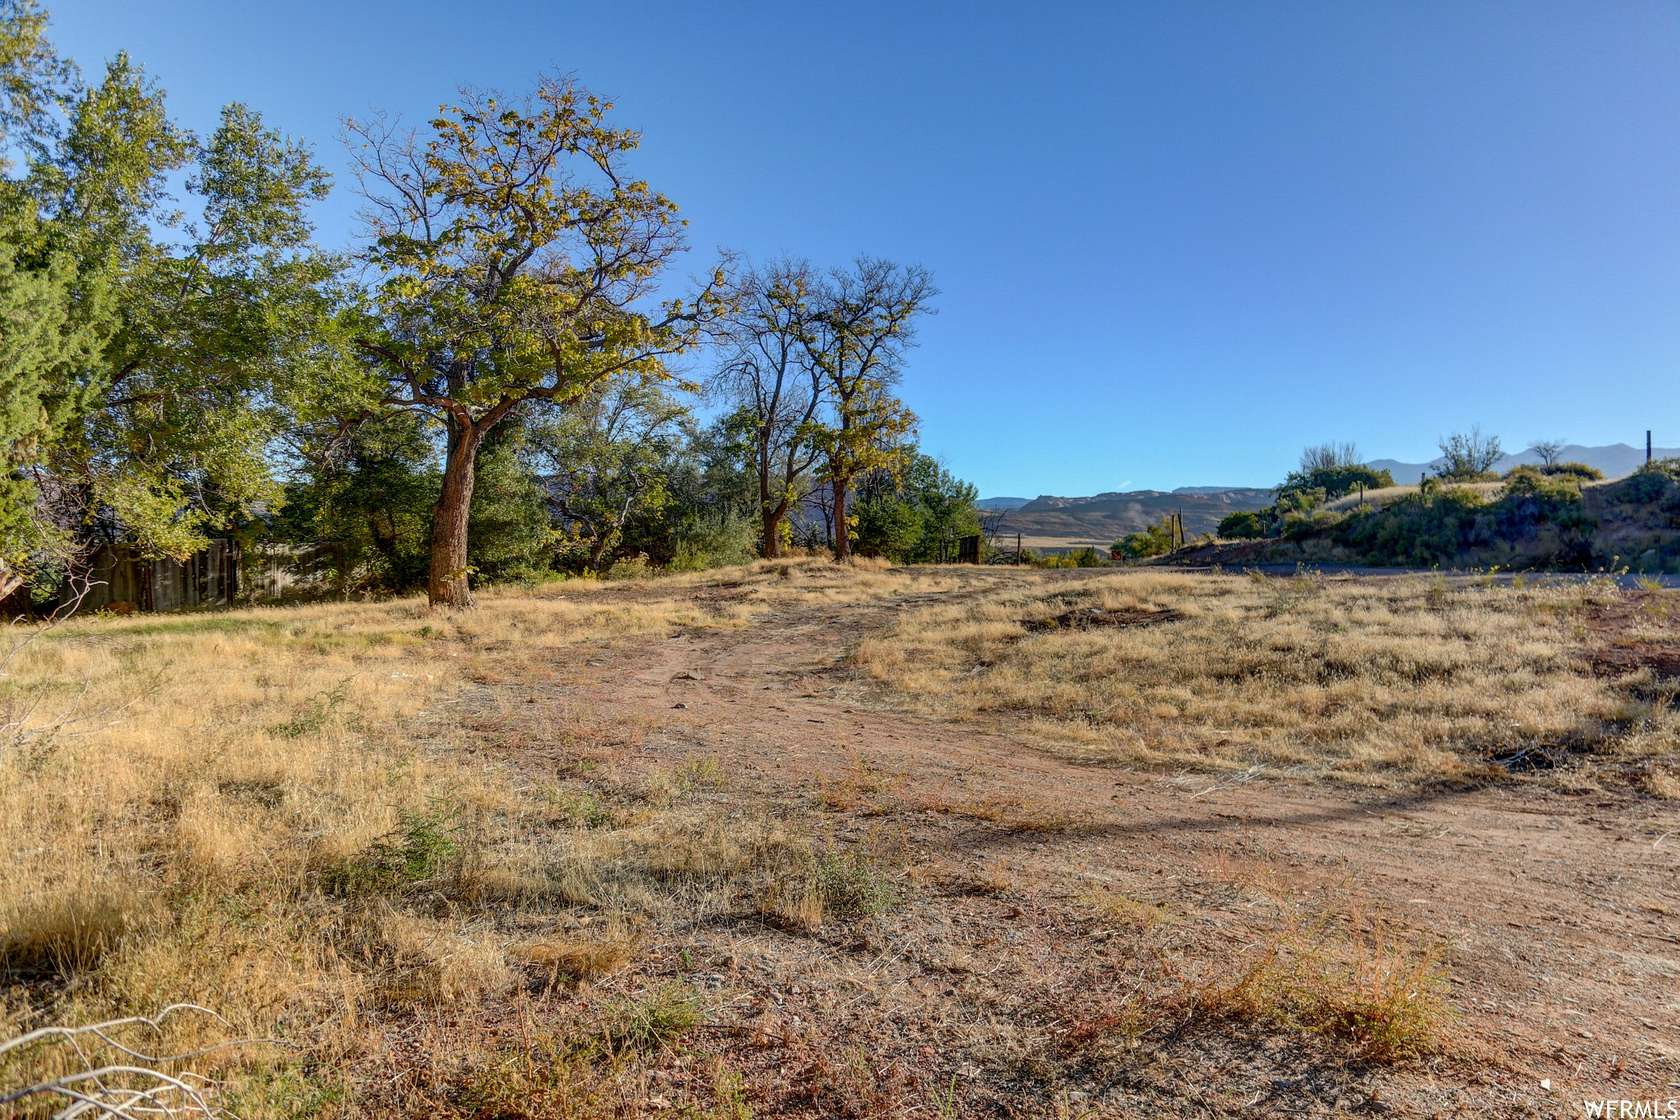 1 Acre of Mixed-Use Land for Sale in Moab, Utah